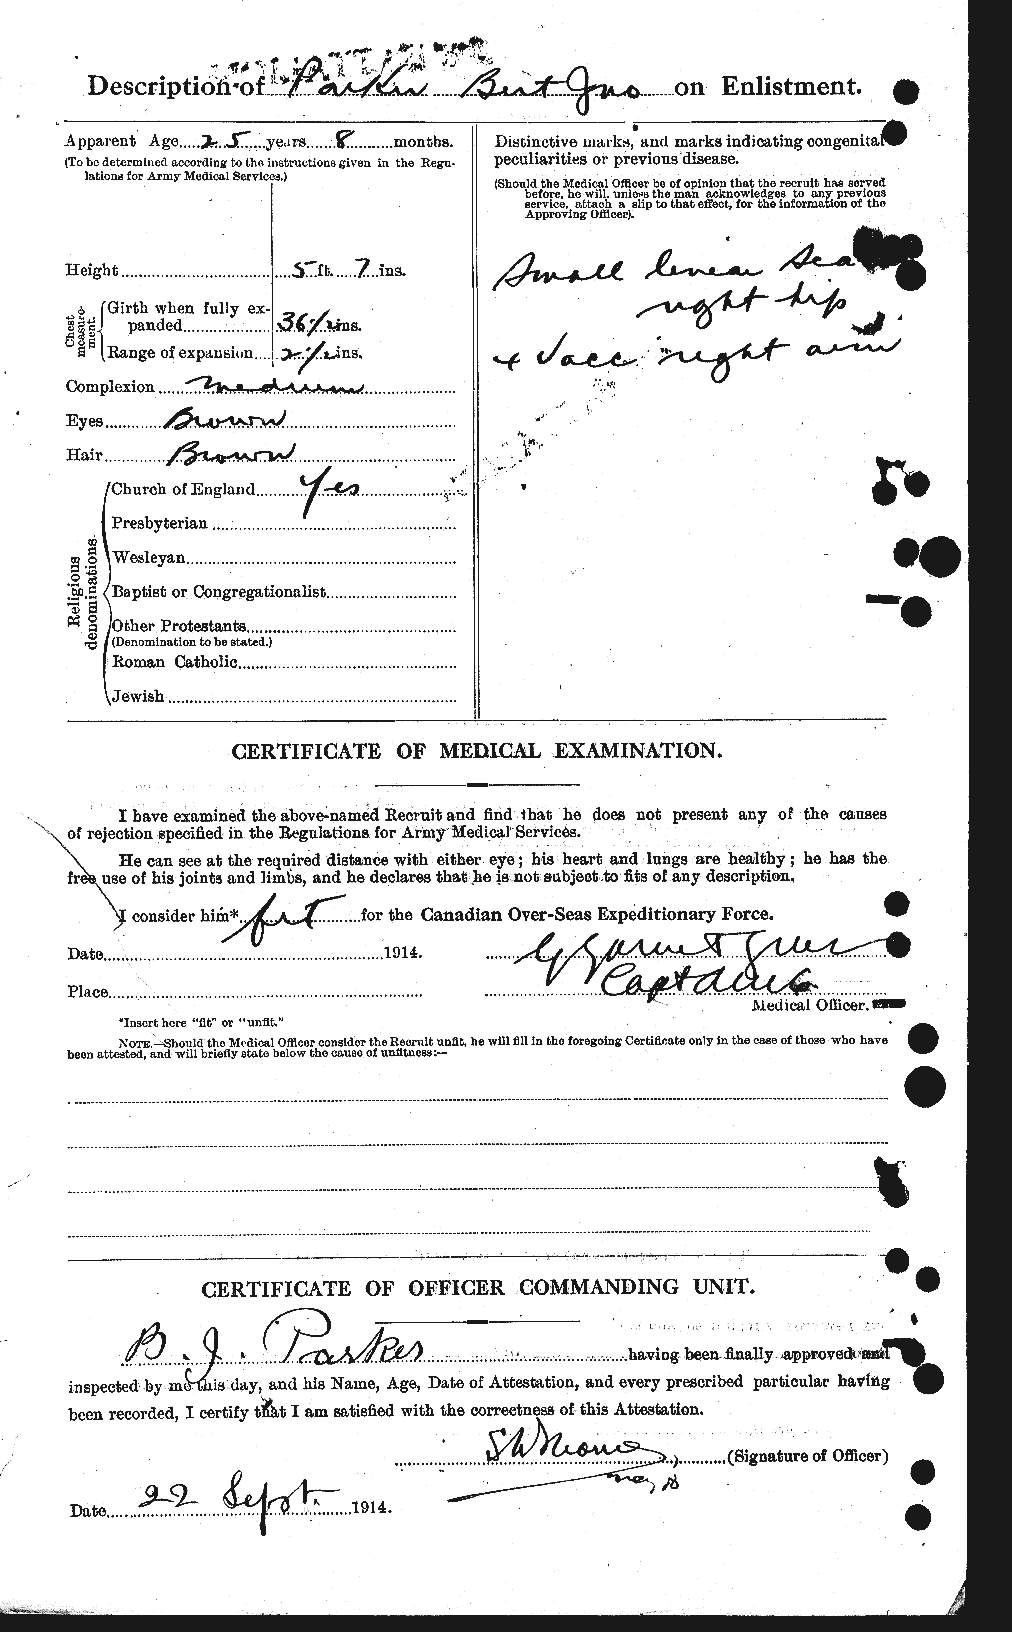 Personnel Records of the First World War - CEF 565047b